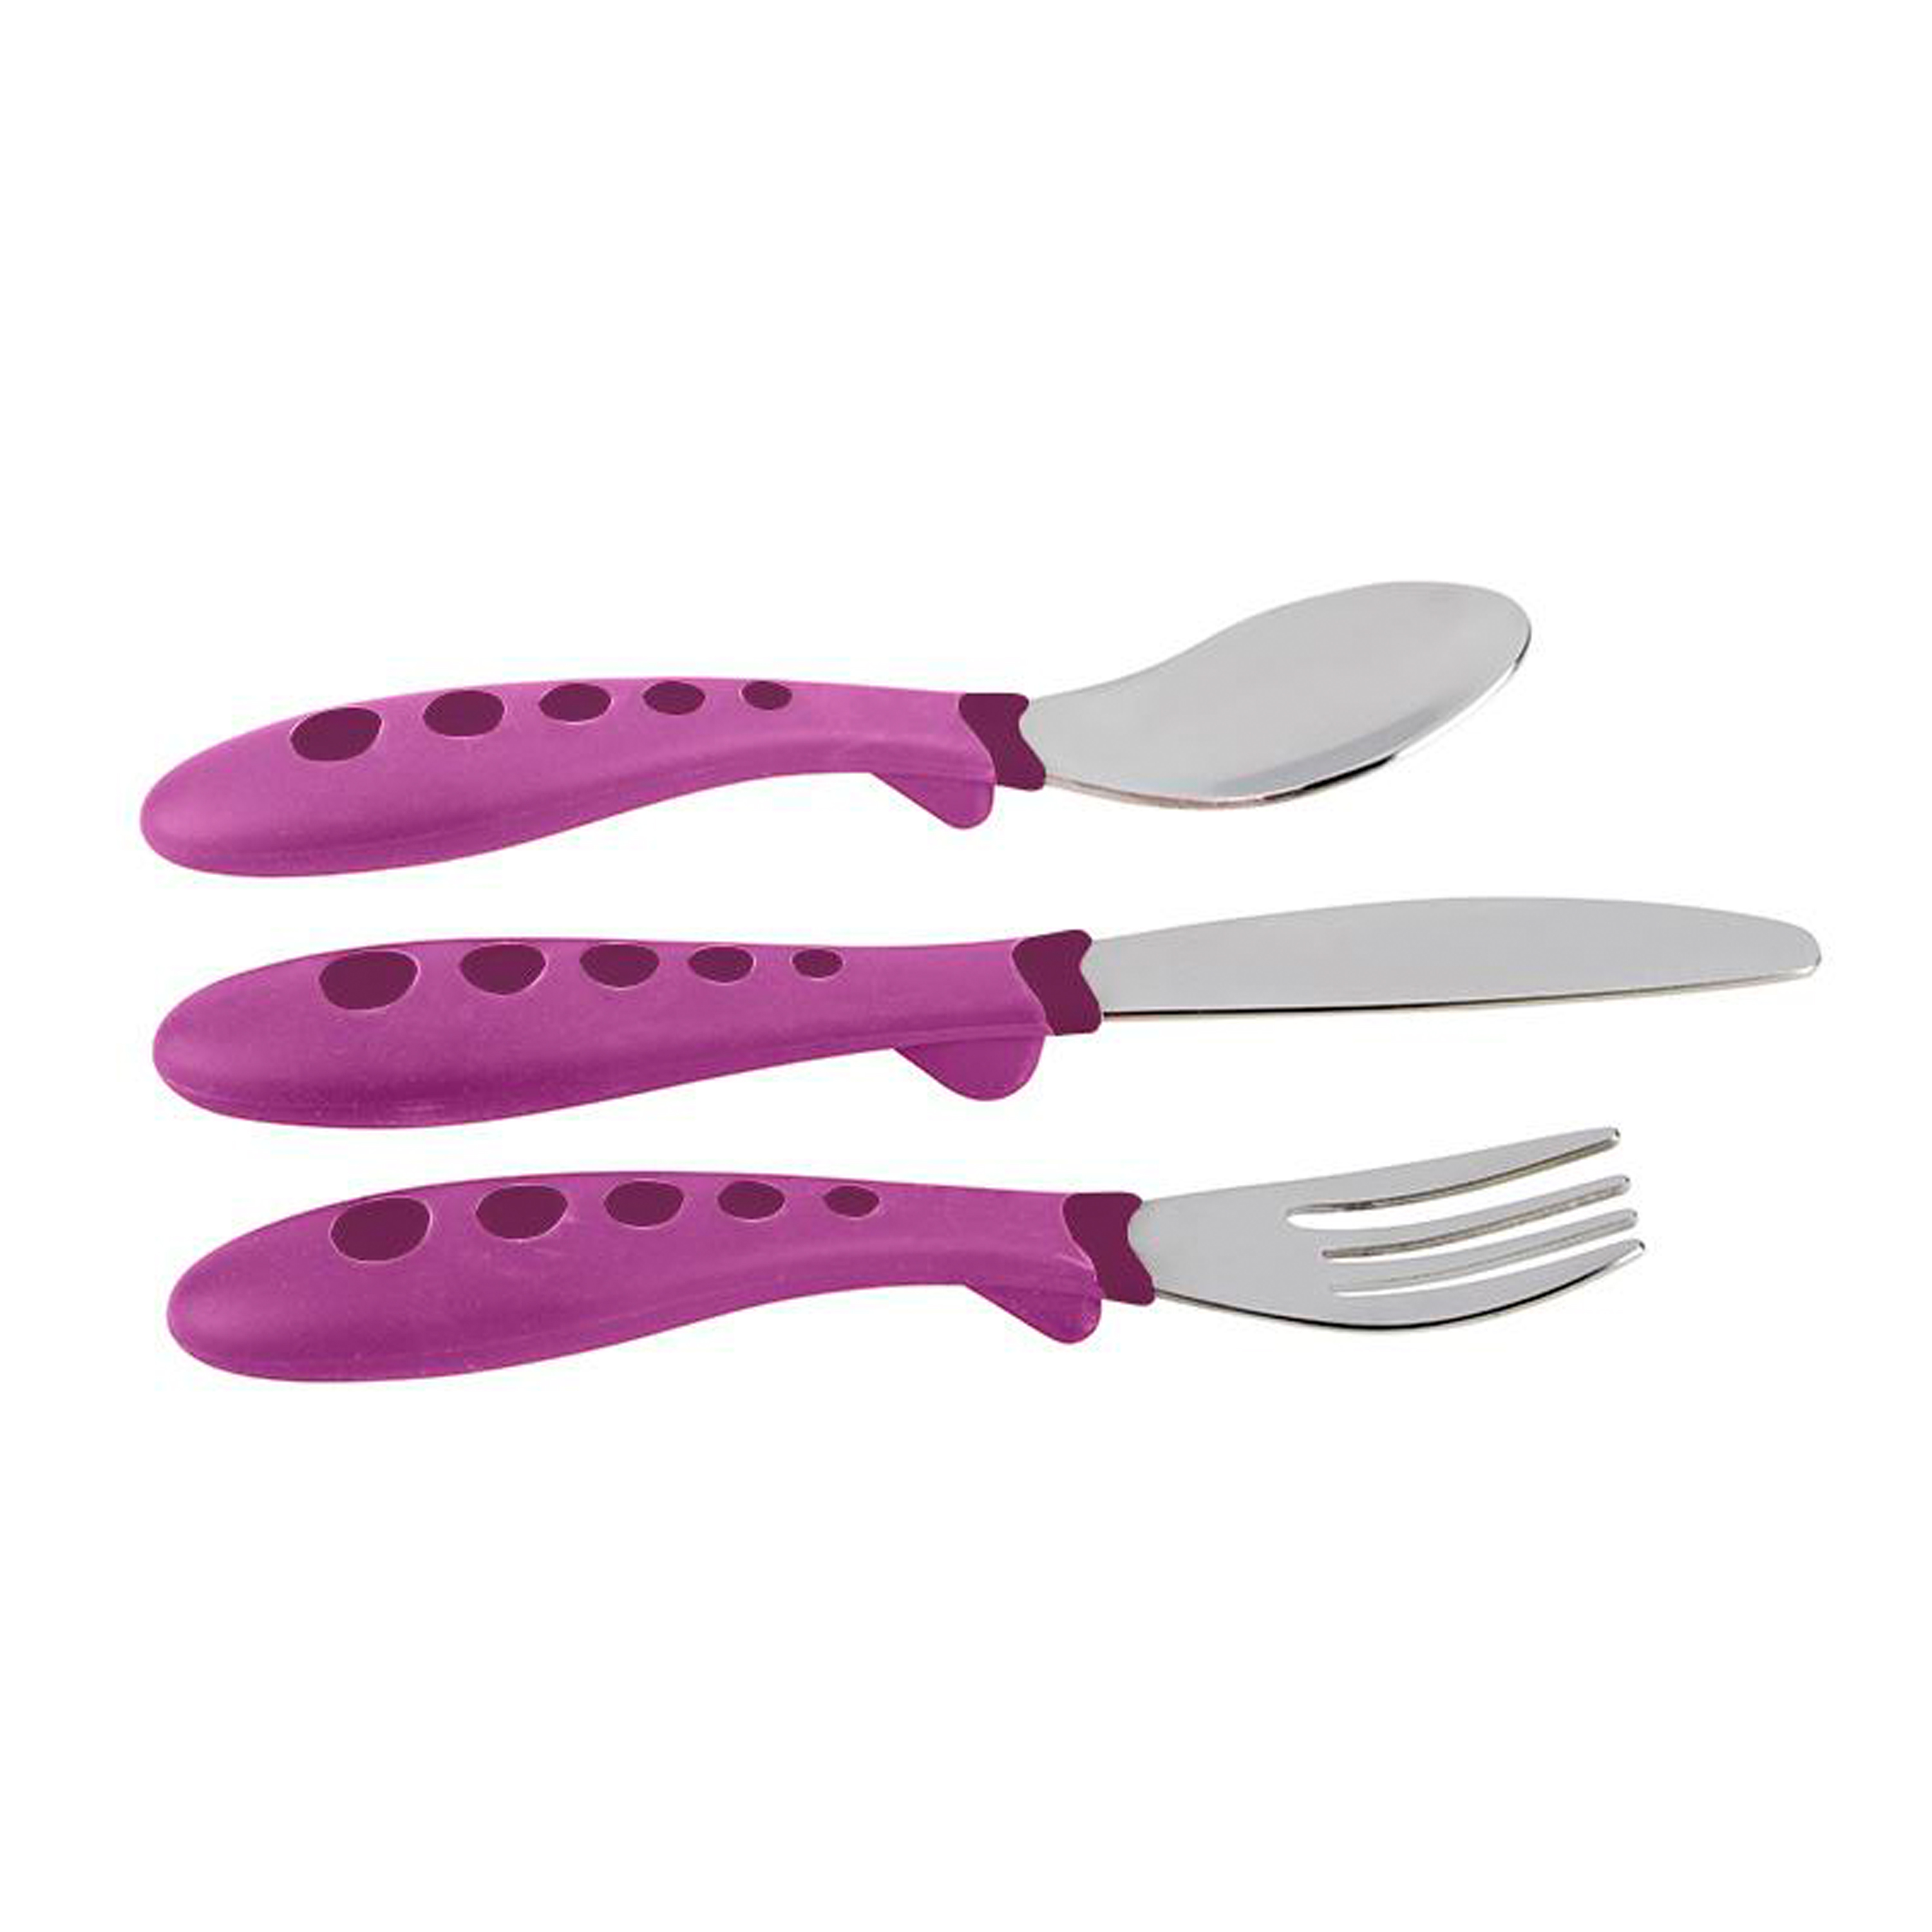 First Essentials by NUK™ Kiddy Cutlery® Knife, Fork and Spoon Set, 3-Pack - image 5 of 6